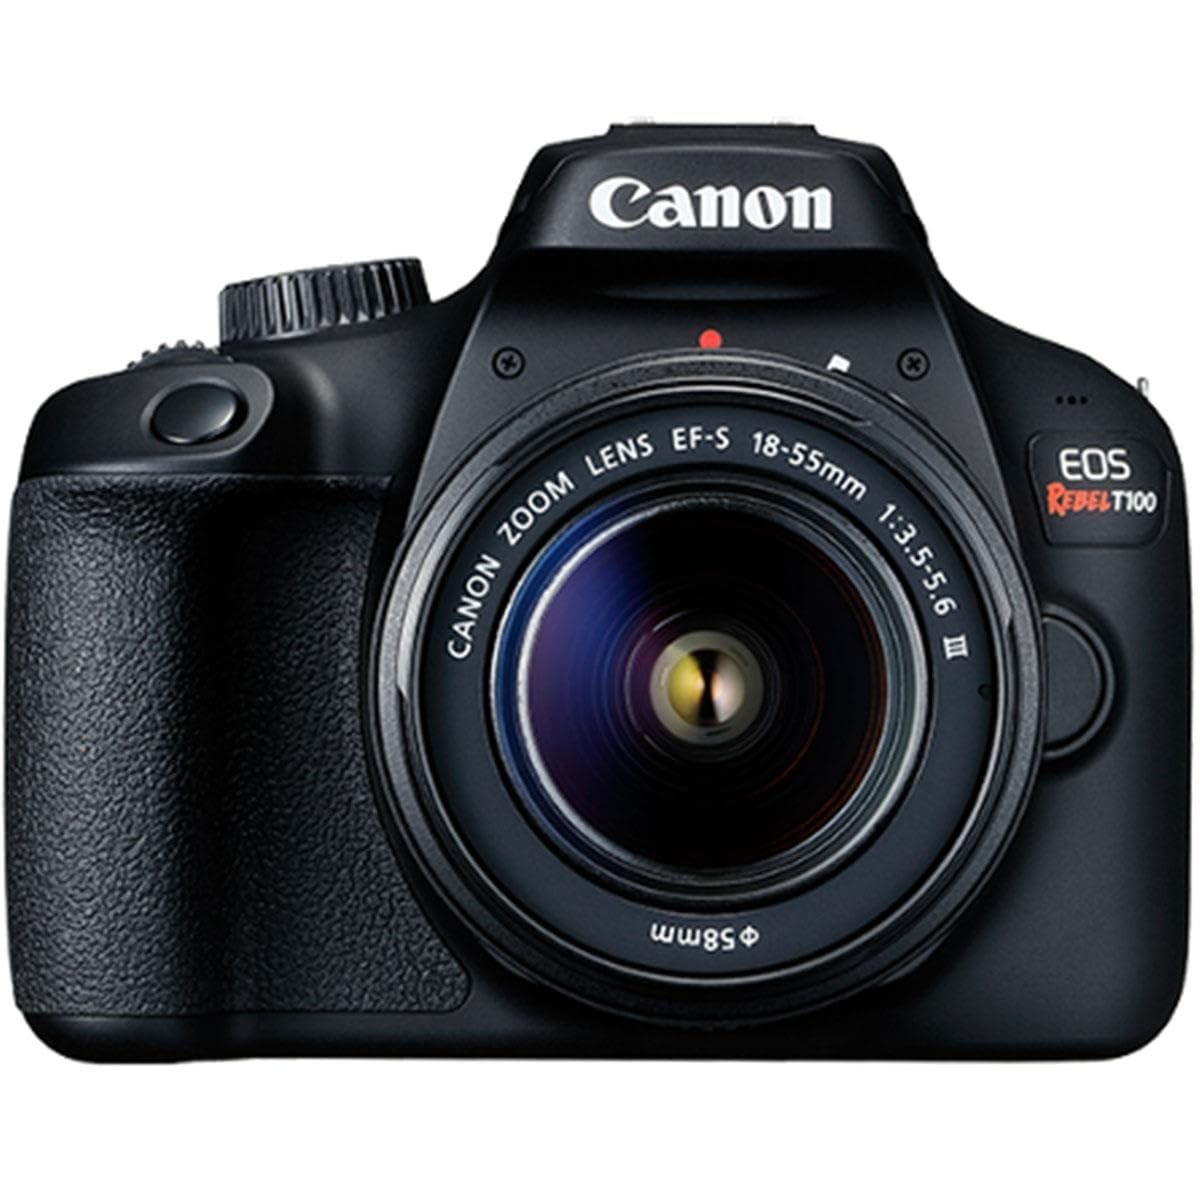 Canon EOS Rebel T100 DSLR Camera with 18-55mm III Lens